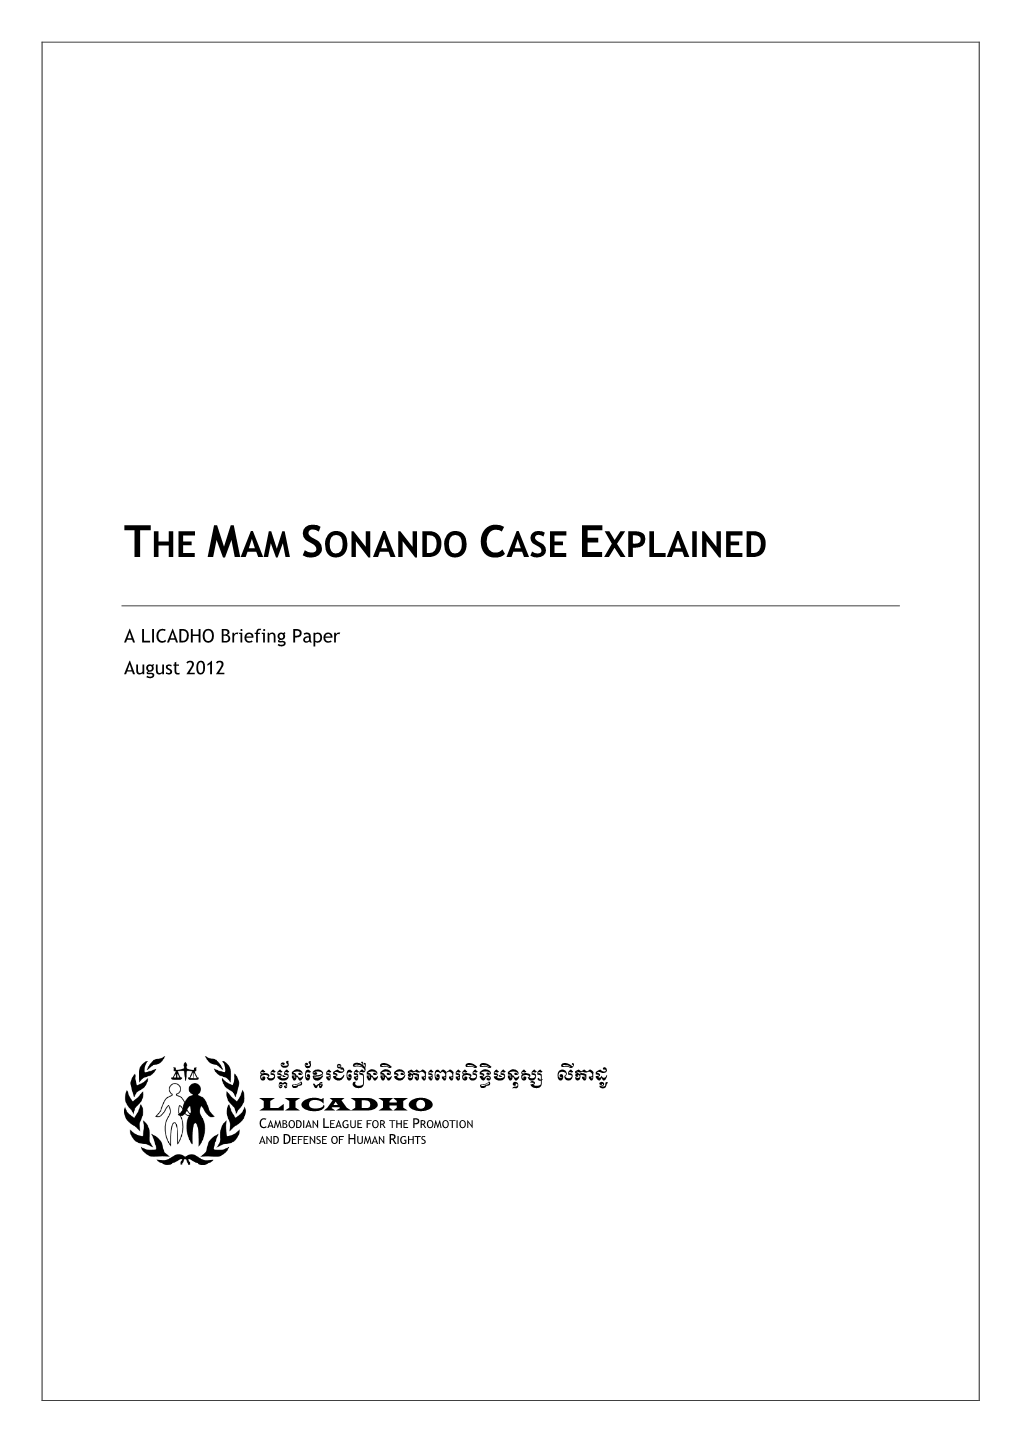 Briefing Paper: the Mam Sonando Case Explained